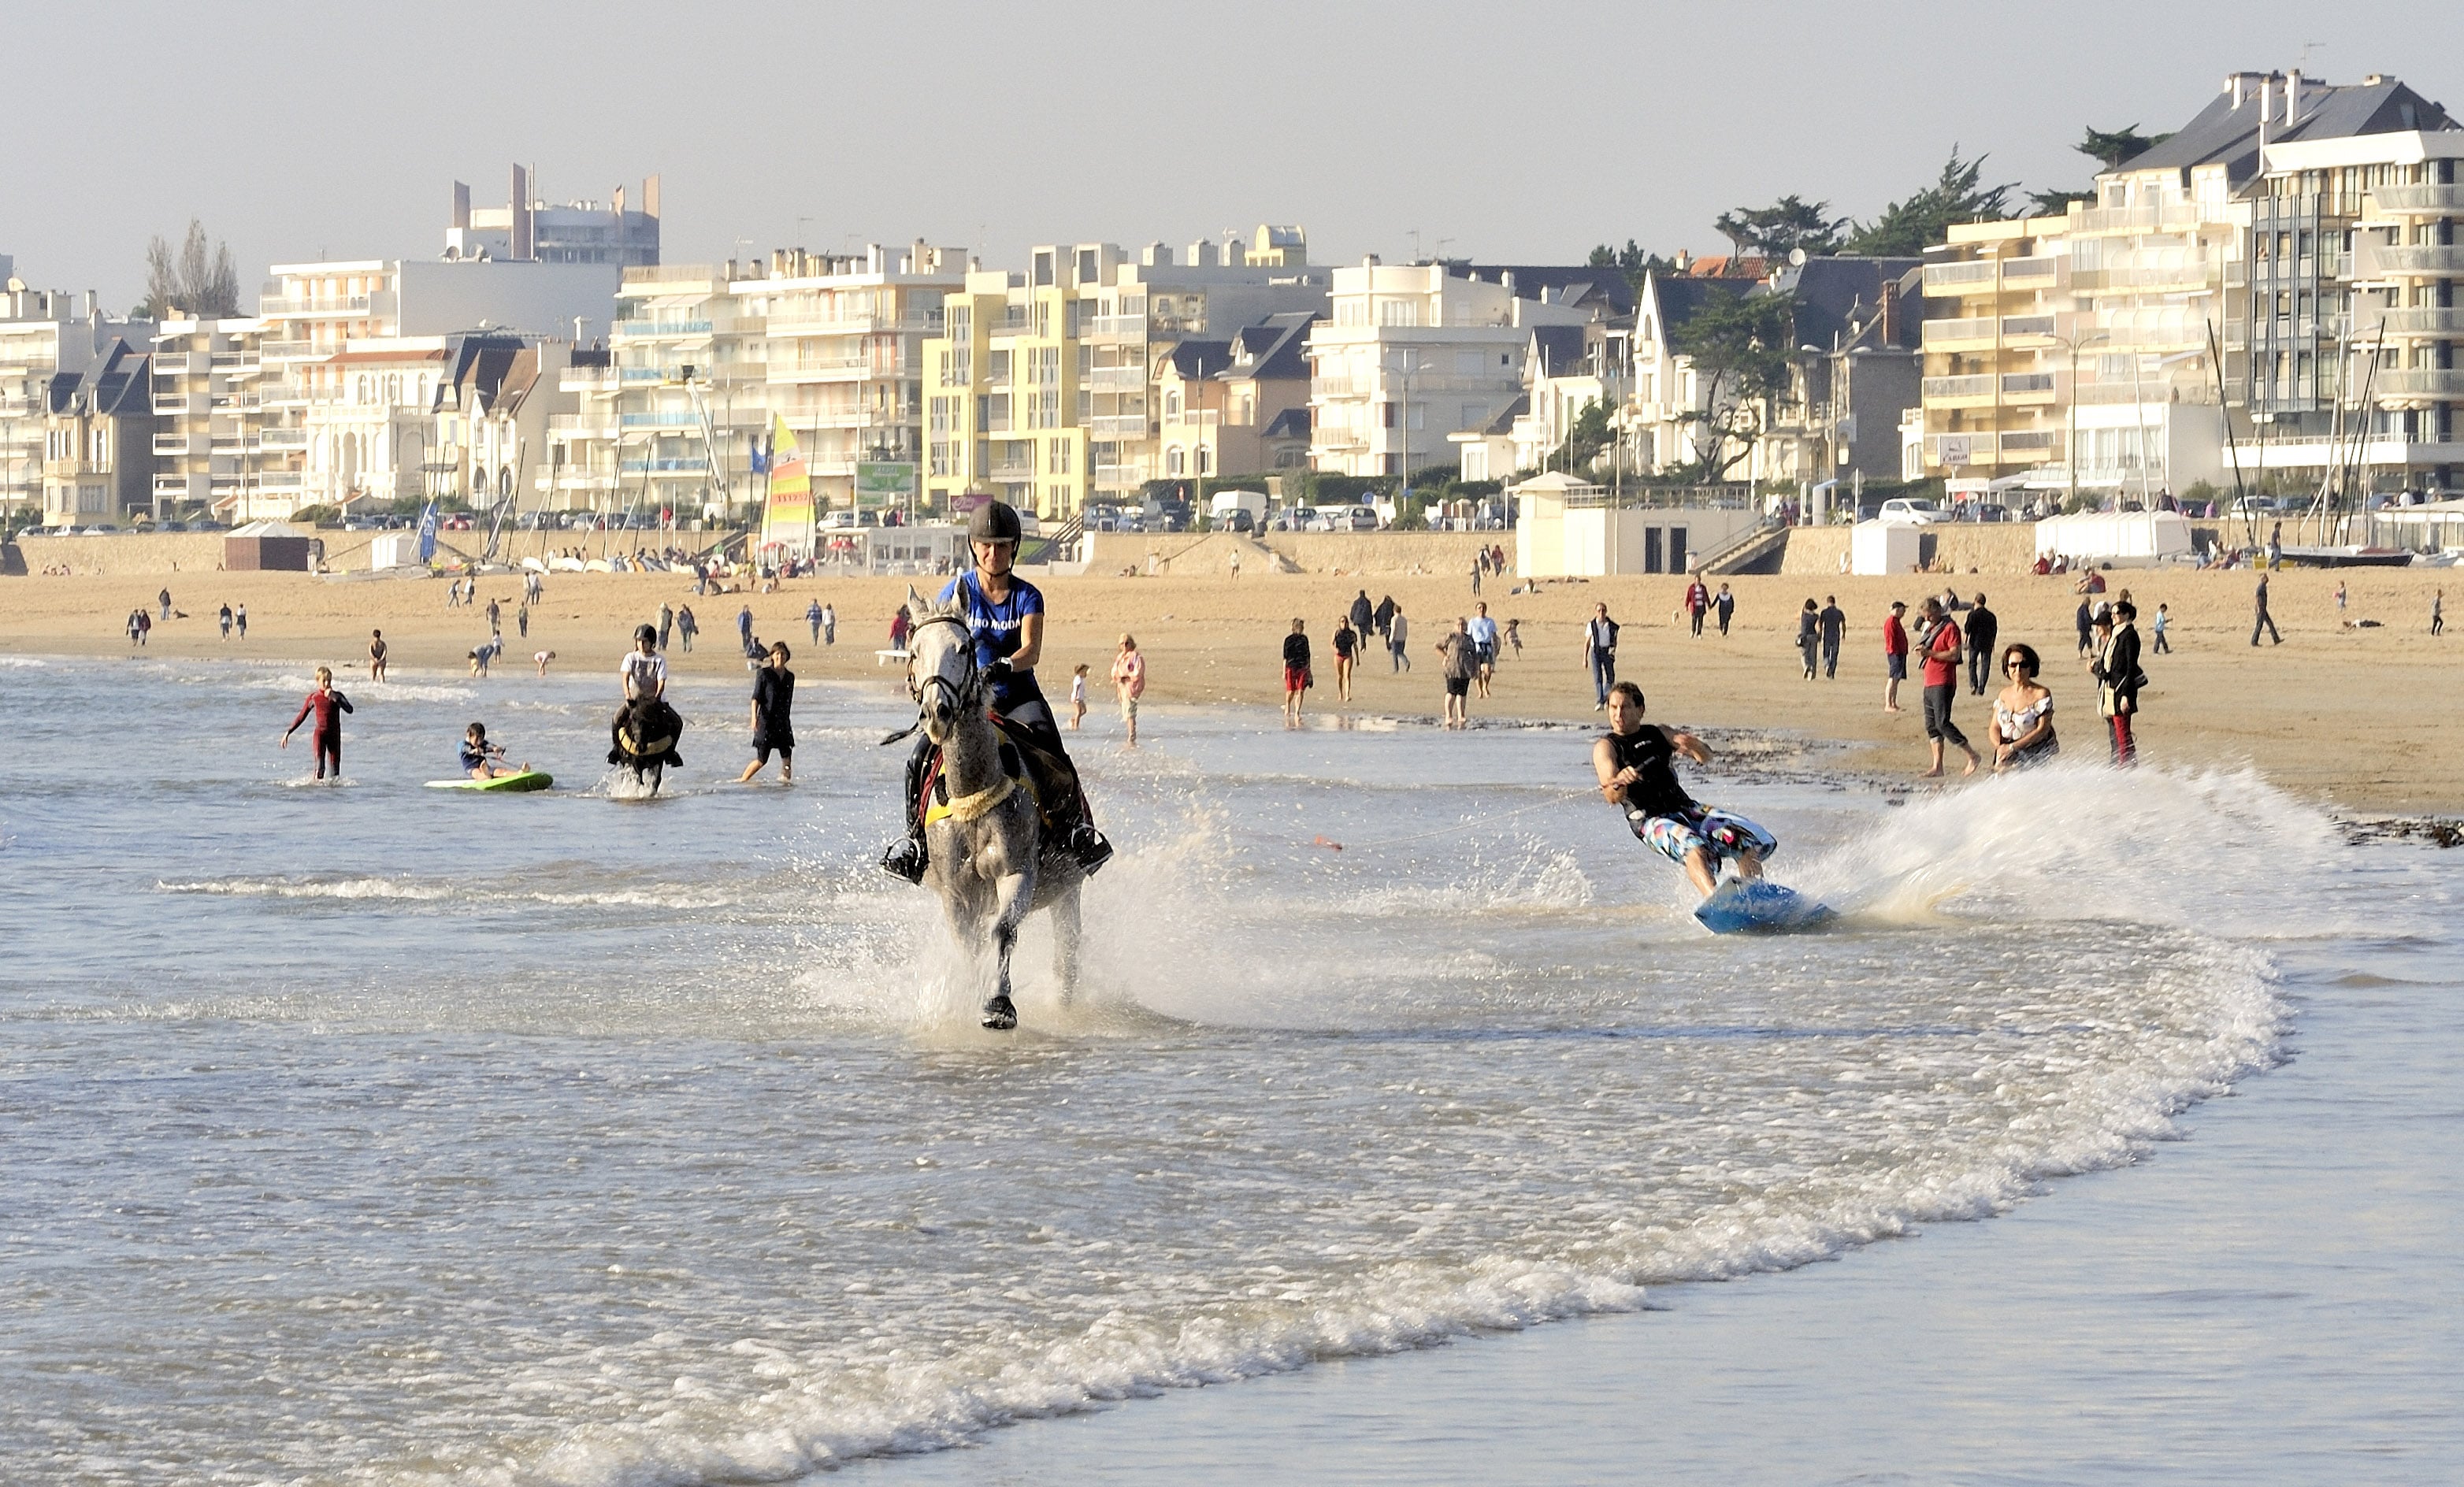 Le horse-surfing